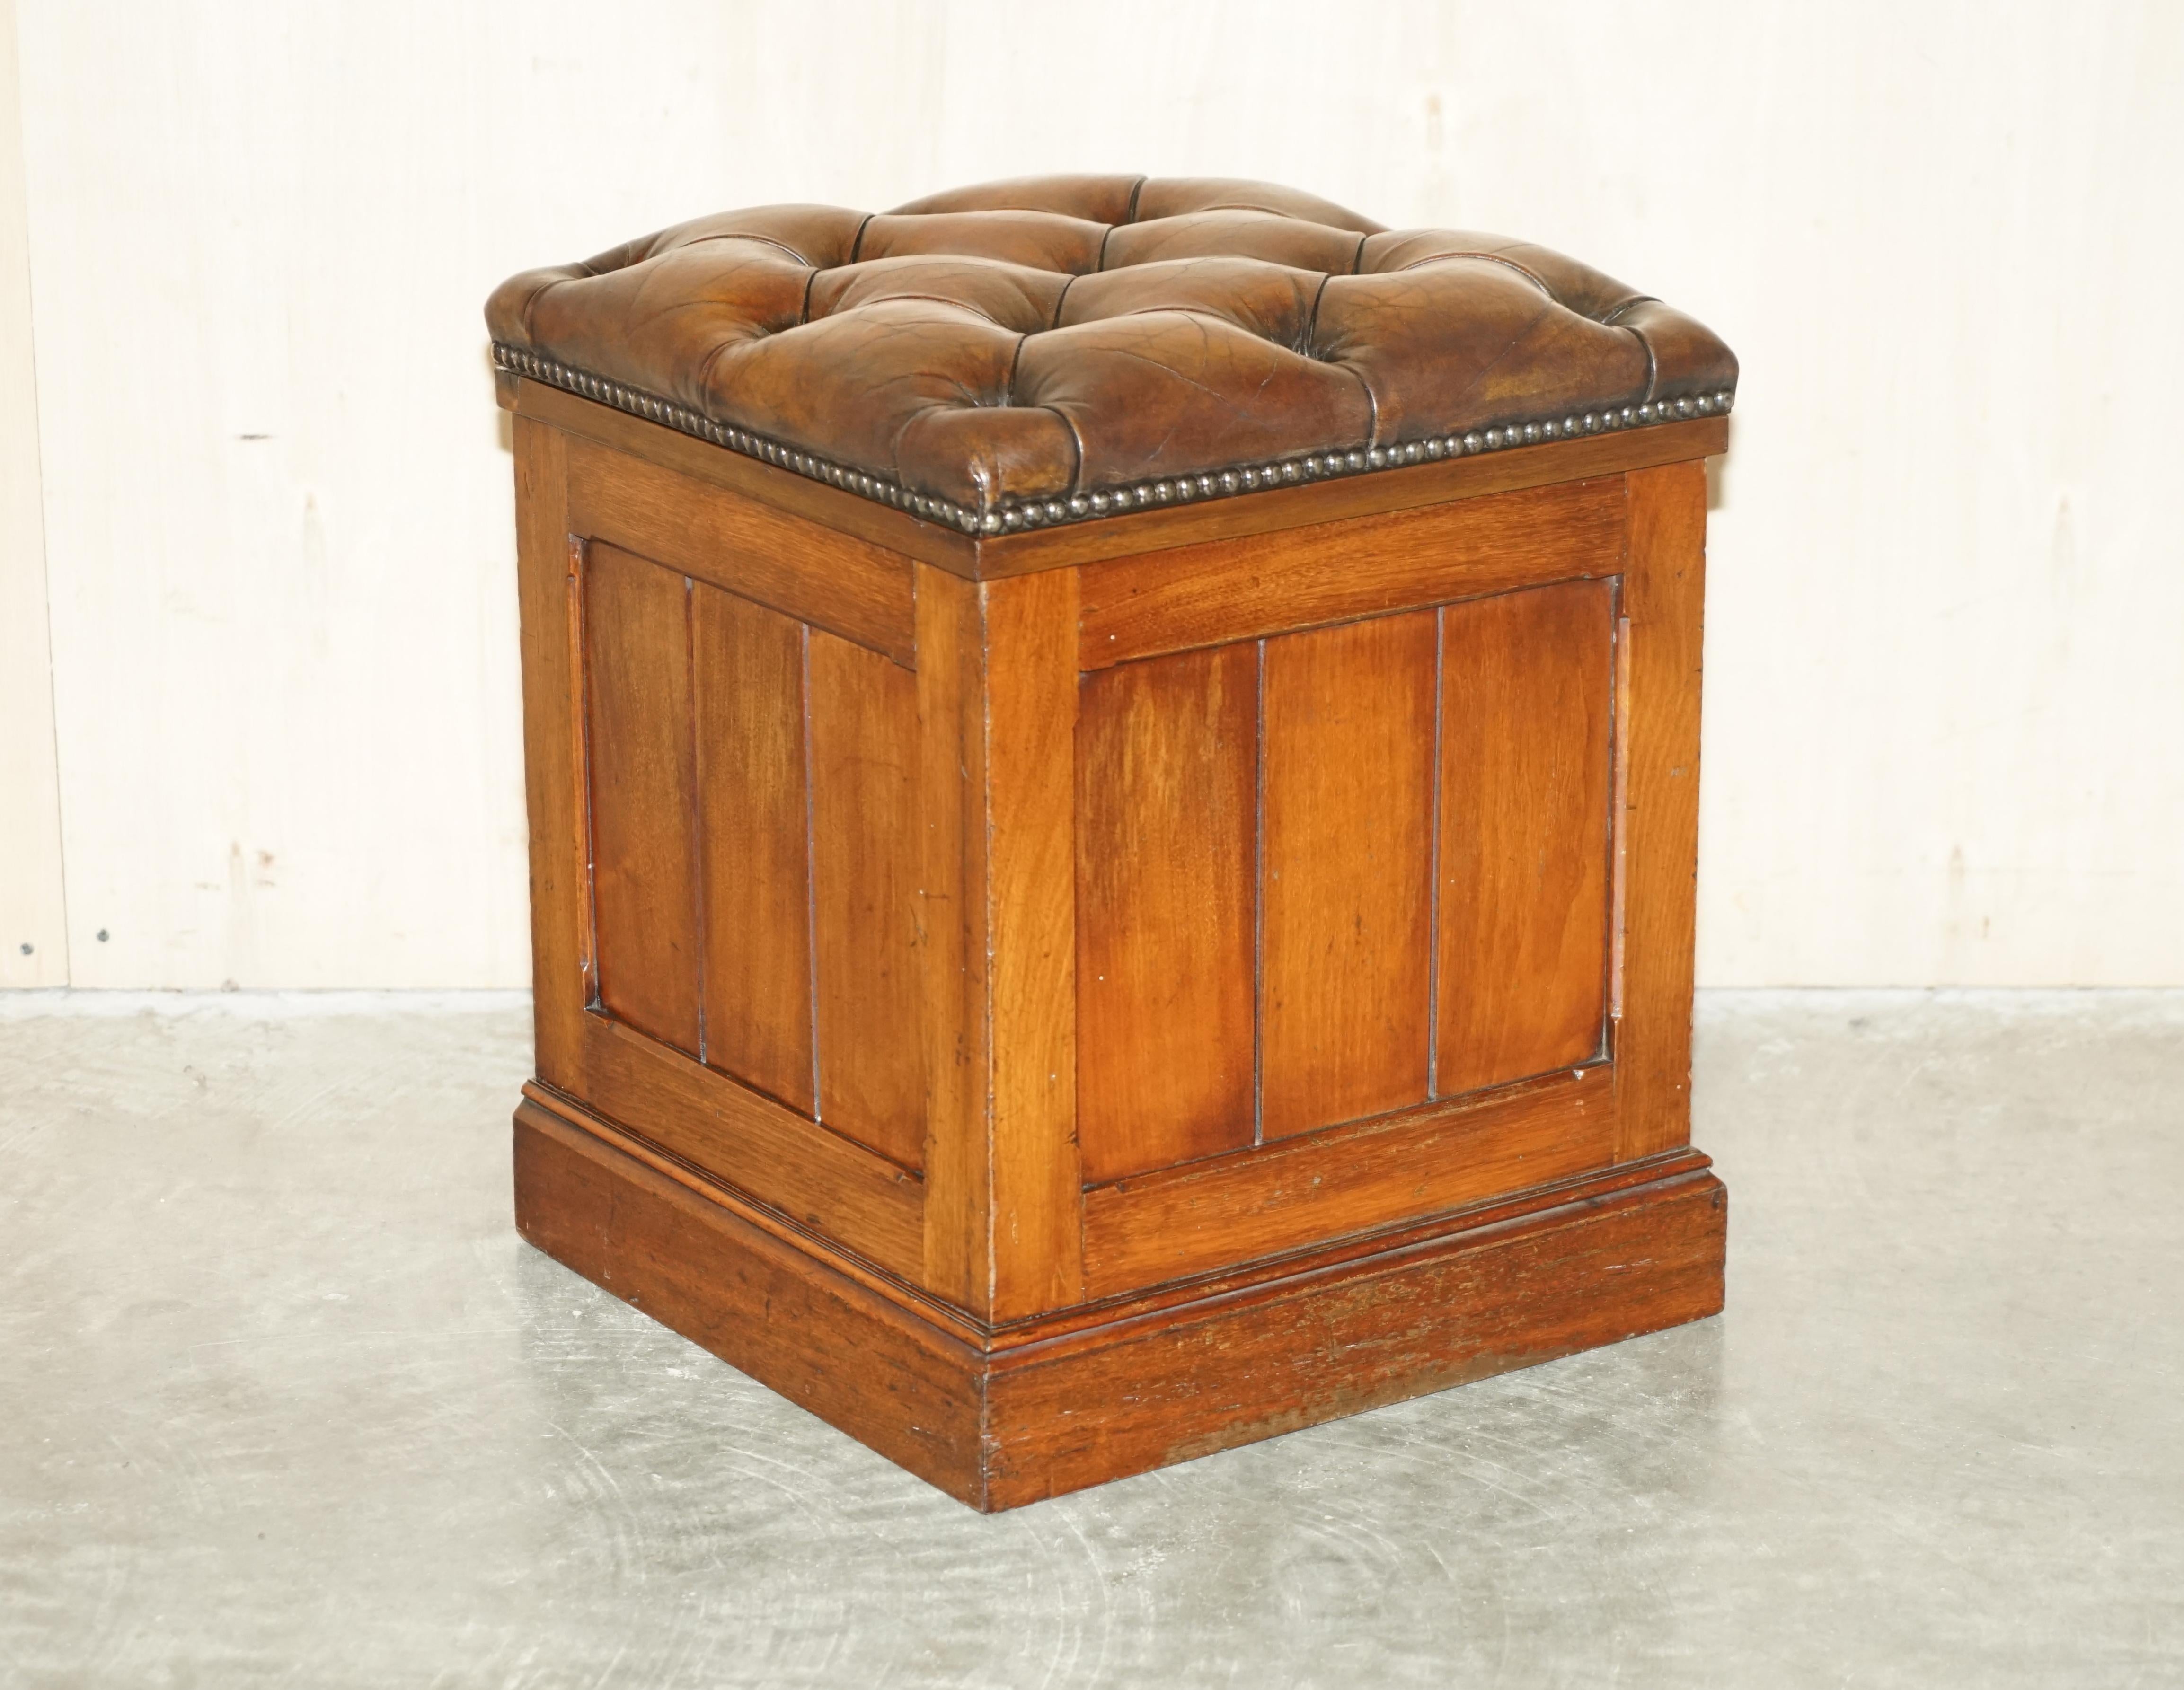 We are delighted to offer for sale this restored Victorian circa 1860-1880, hand dyed cigar brown leather single stool or ottoman with internal storage

Please note the delivery fee listed is just a guide, it covers within the M25 only for the UK